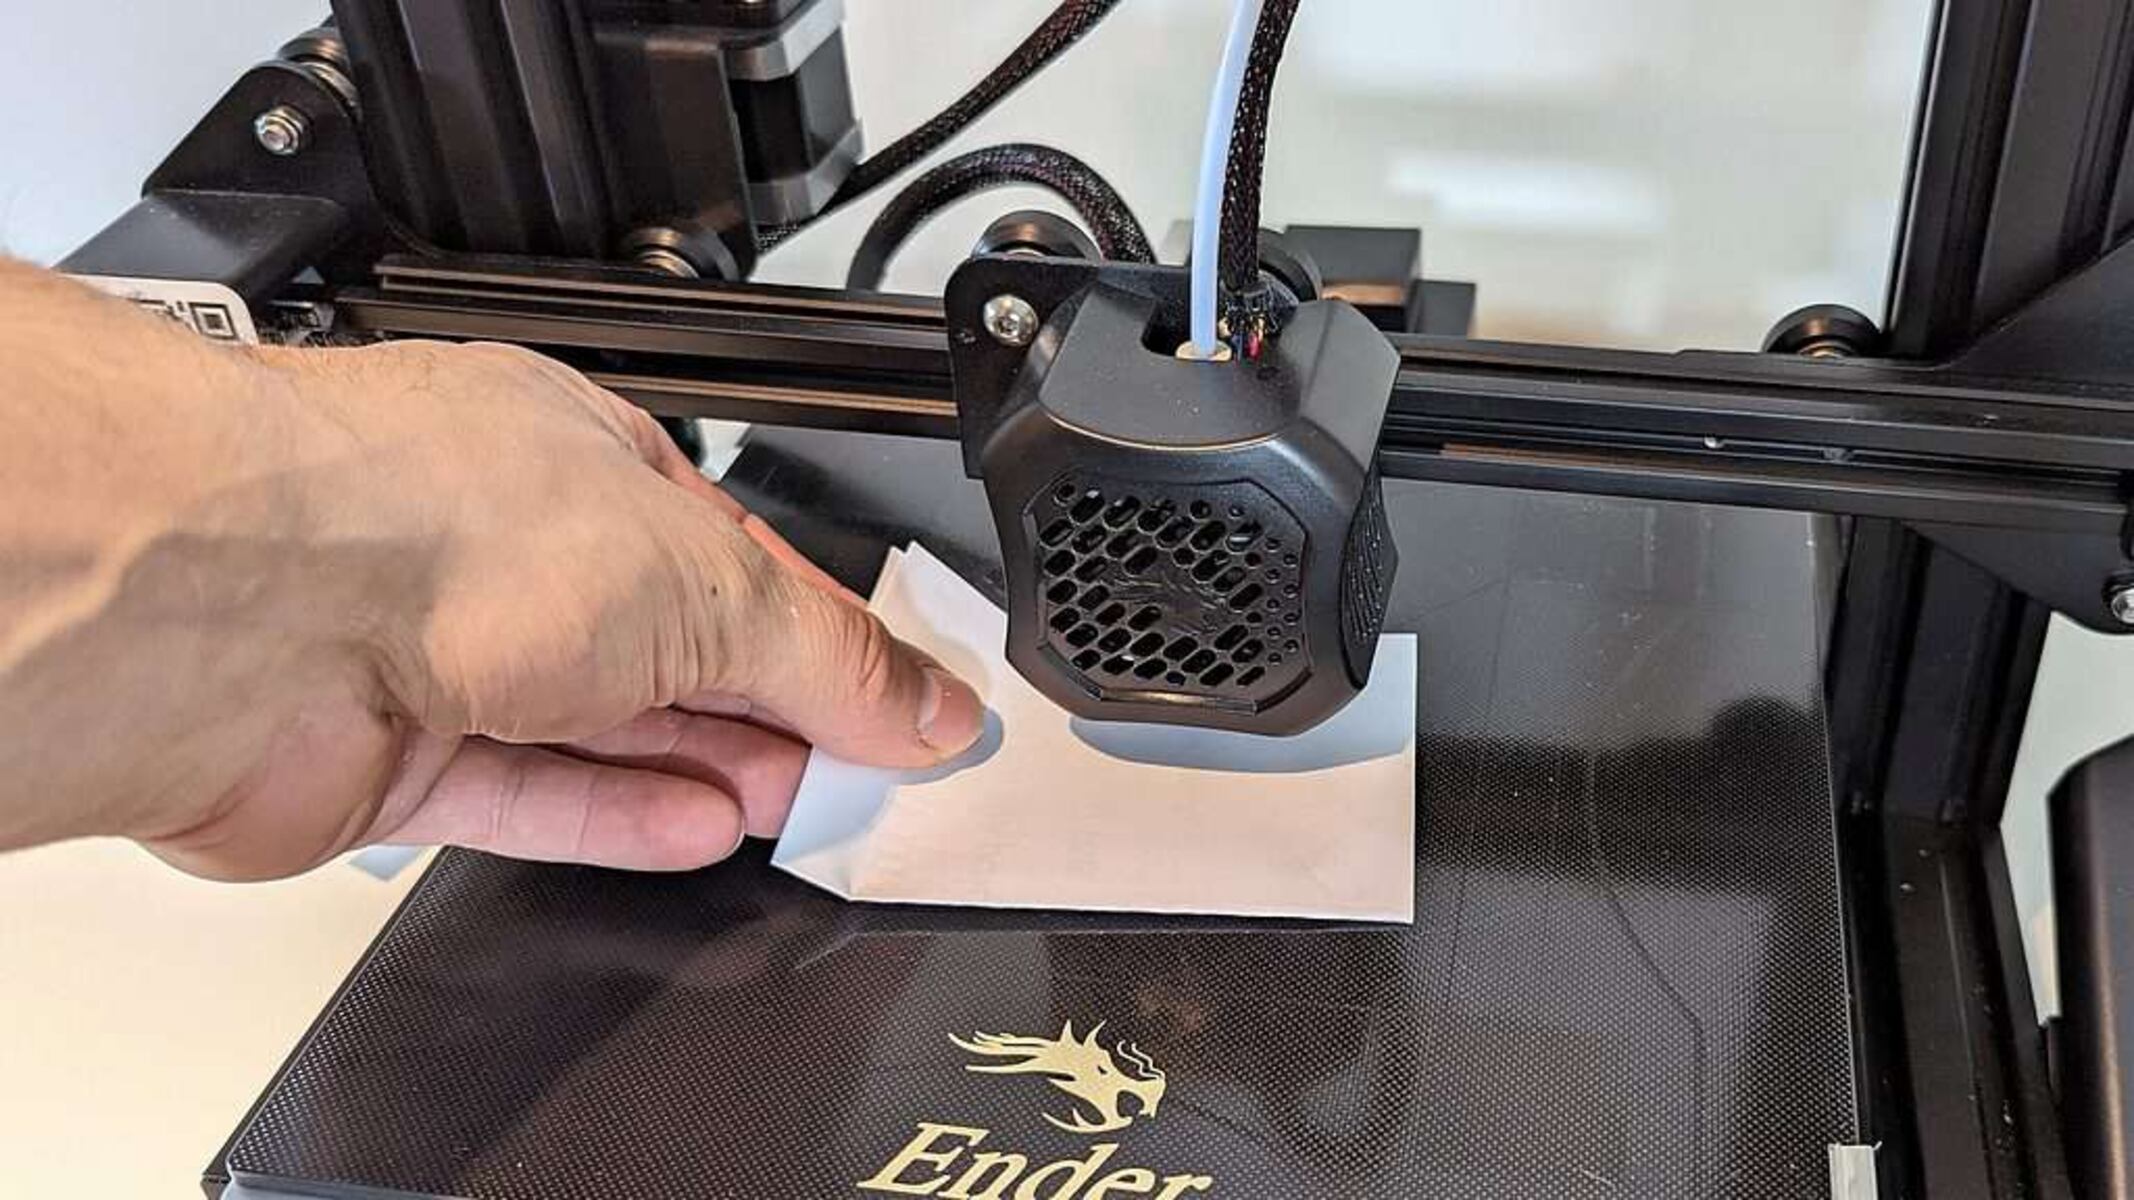 How To Level A 3D Printer Bed On Ender 3